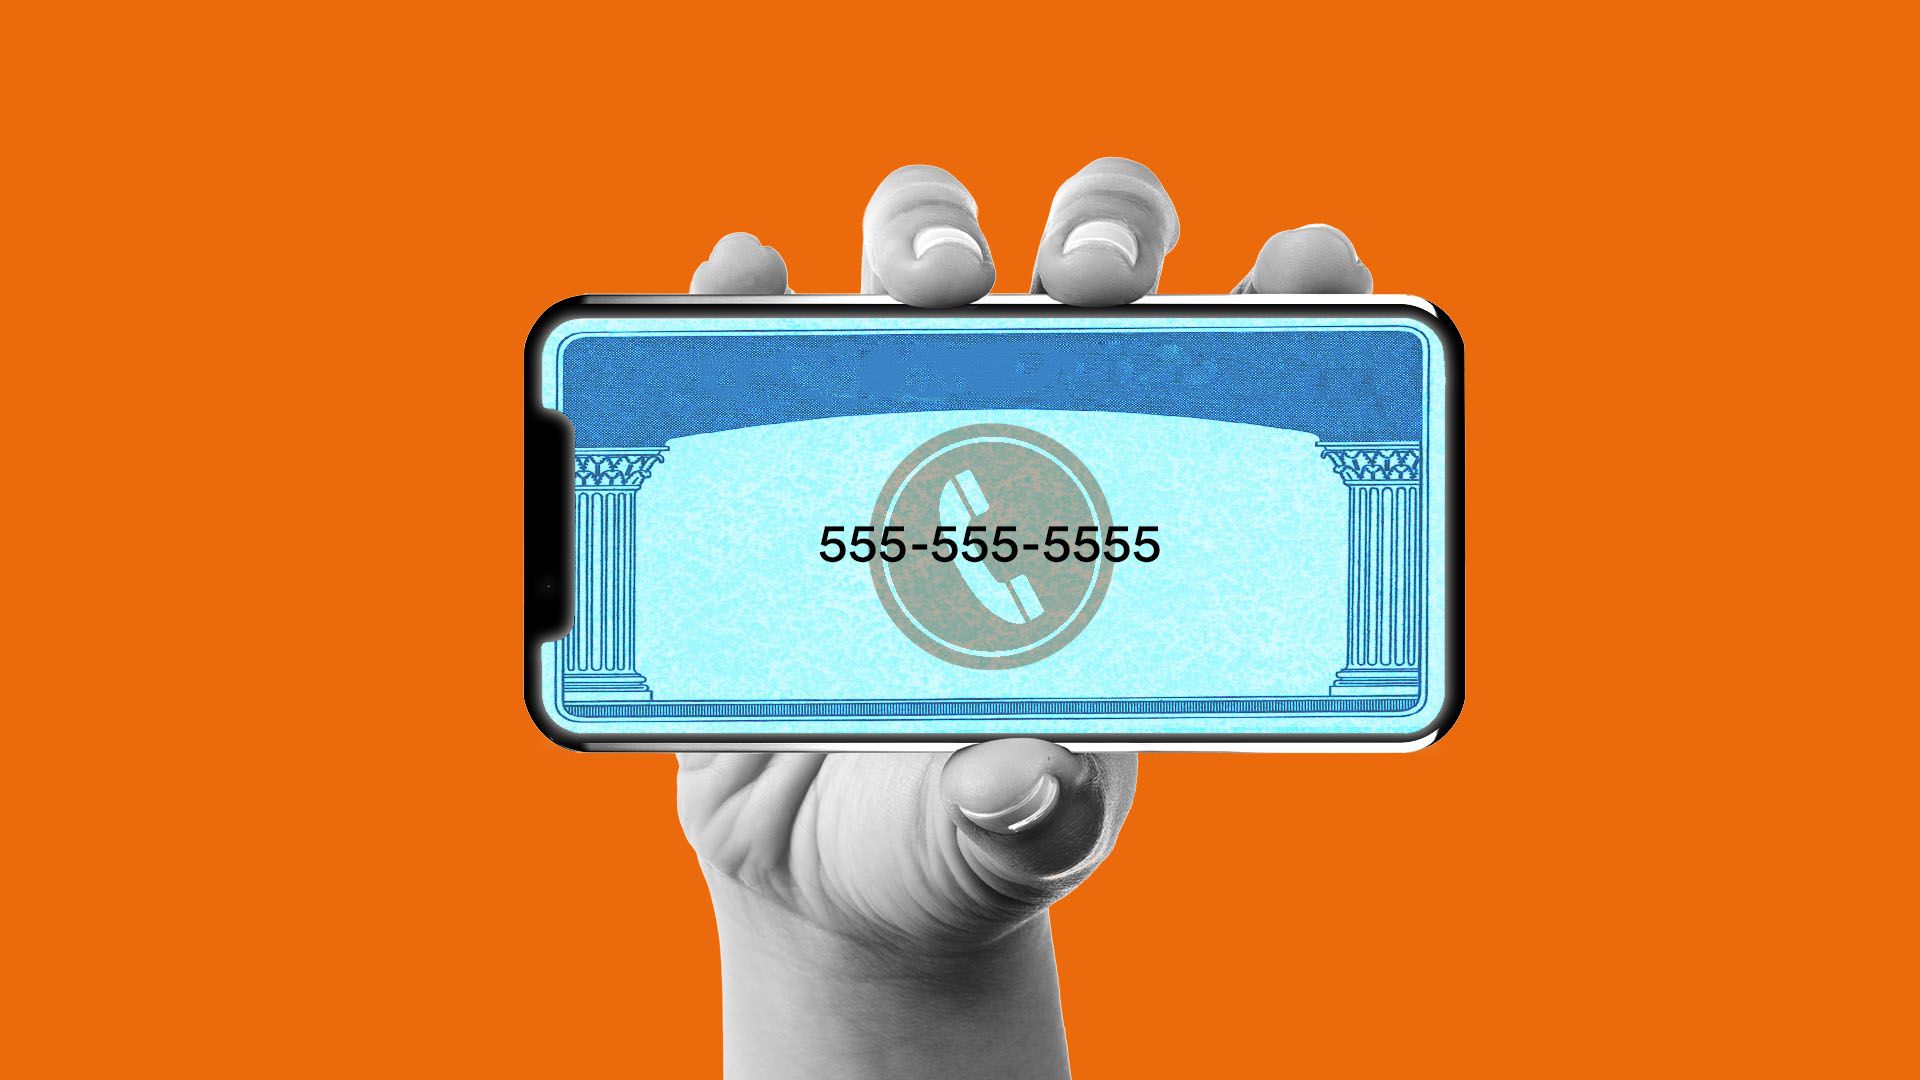 Illustration of cell phone with social security card on the screen